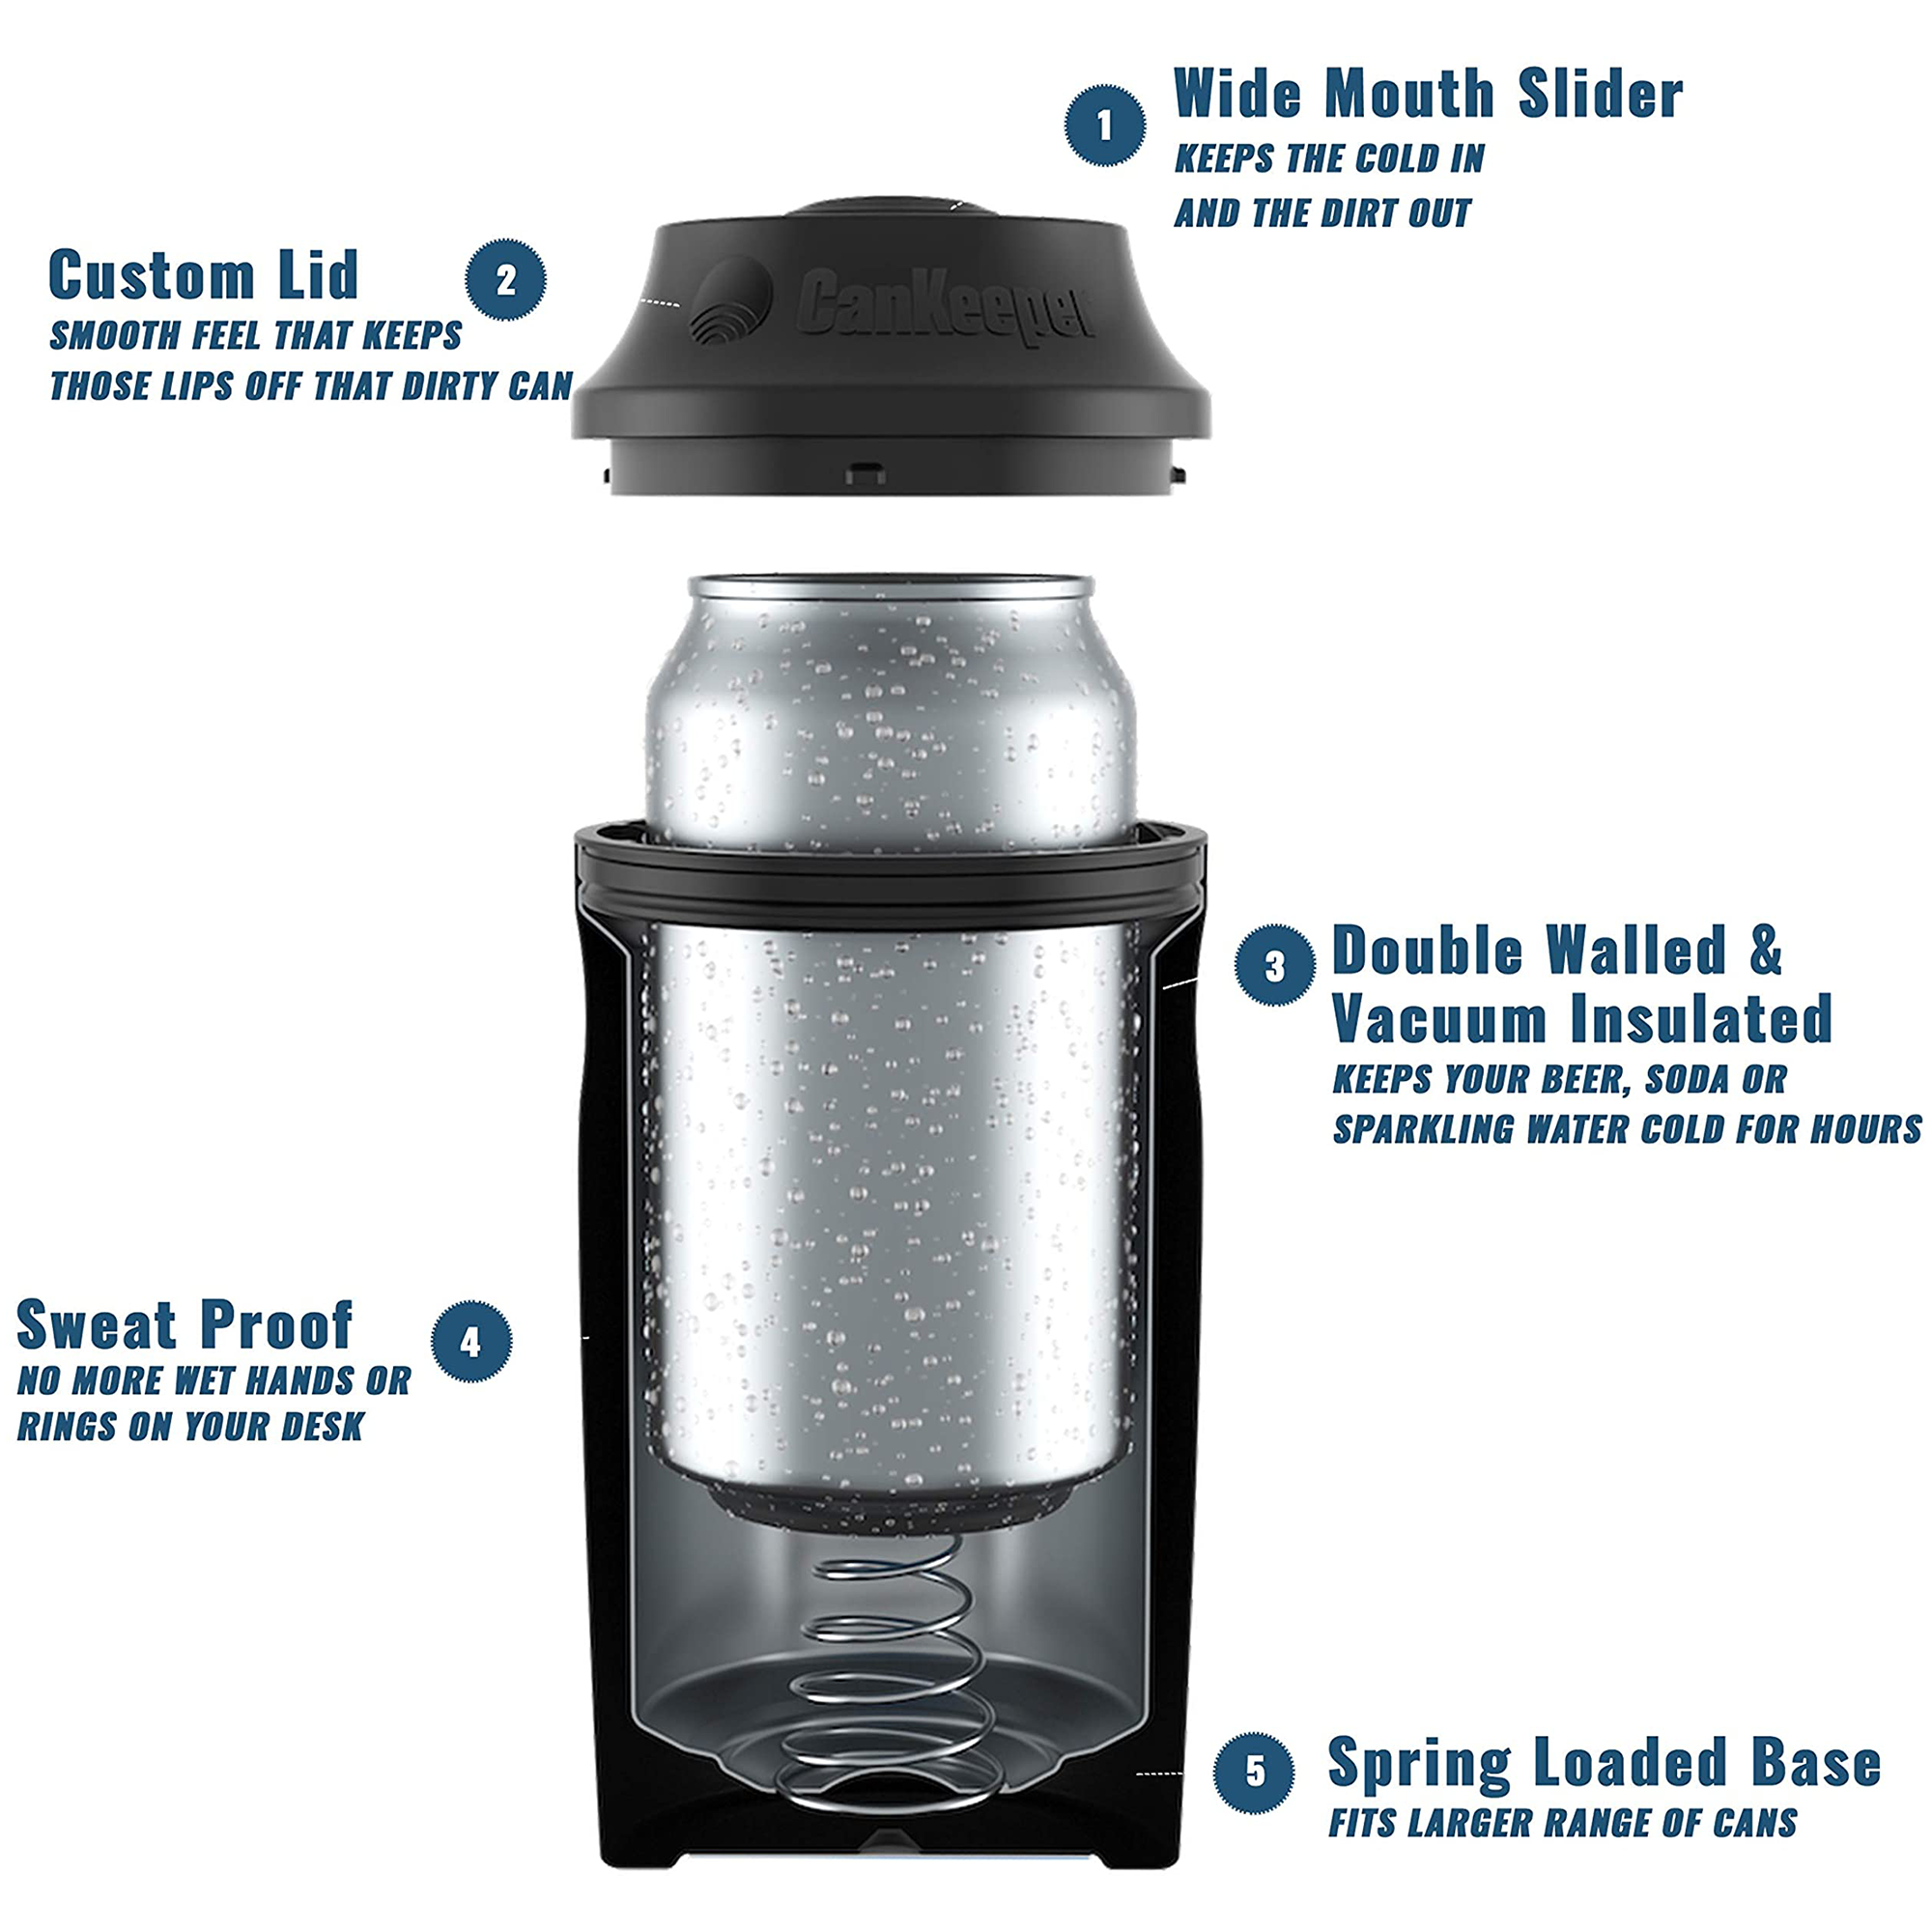 BottleKeeper - The Standard 2.0 - The Original Stainless Steel Bottle  Holder and Insulator to Keep Your Beer Colder (Red)